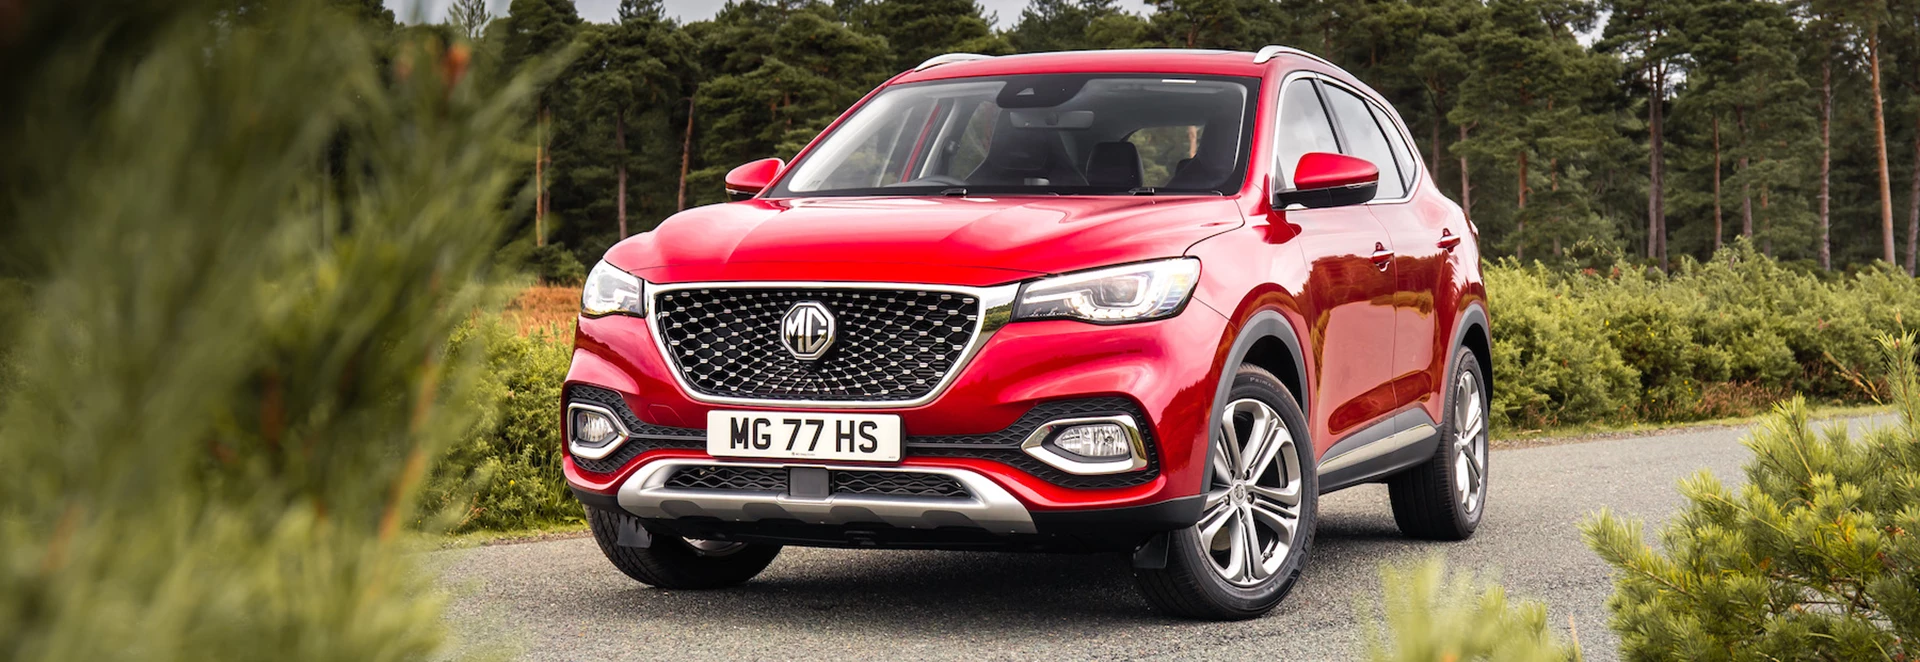 5 cool features on the MG HS SUV 